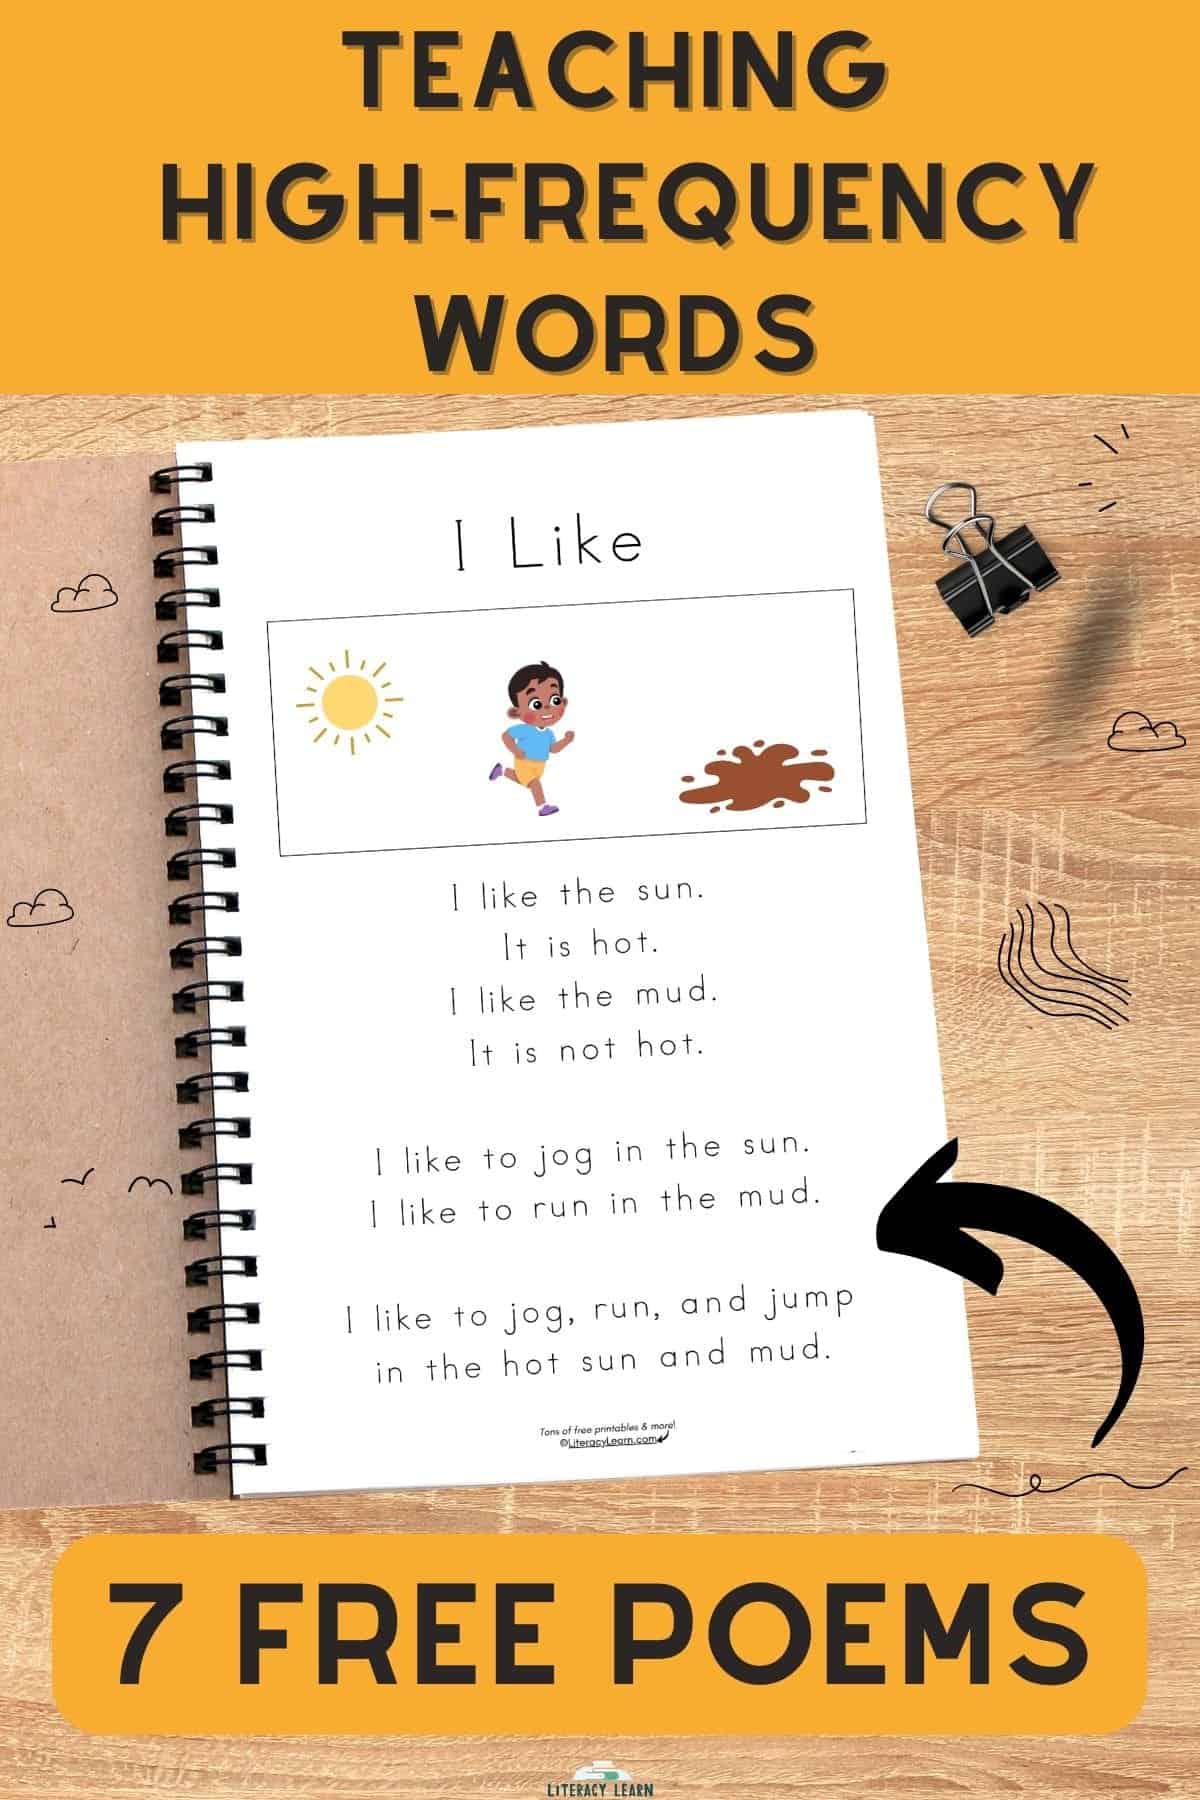 Graphic with student notebook showing poem with title "Teaching High-Frequency Words - 7 Free Free Poems."